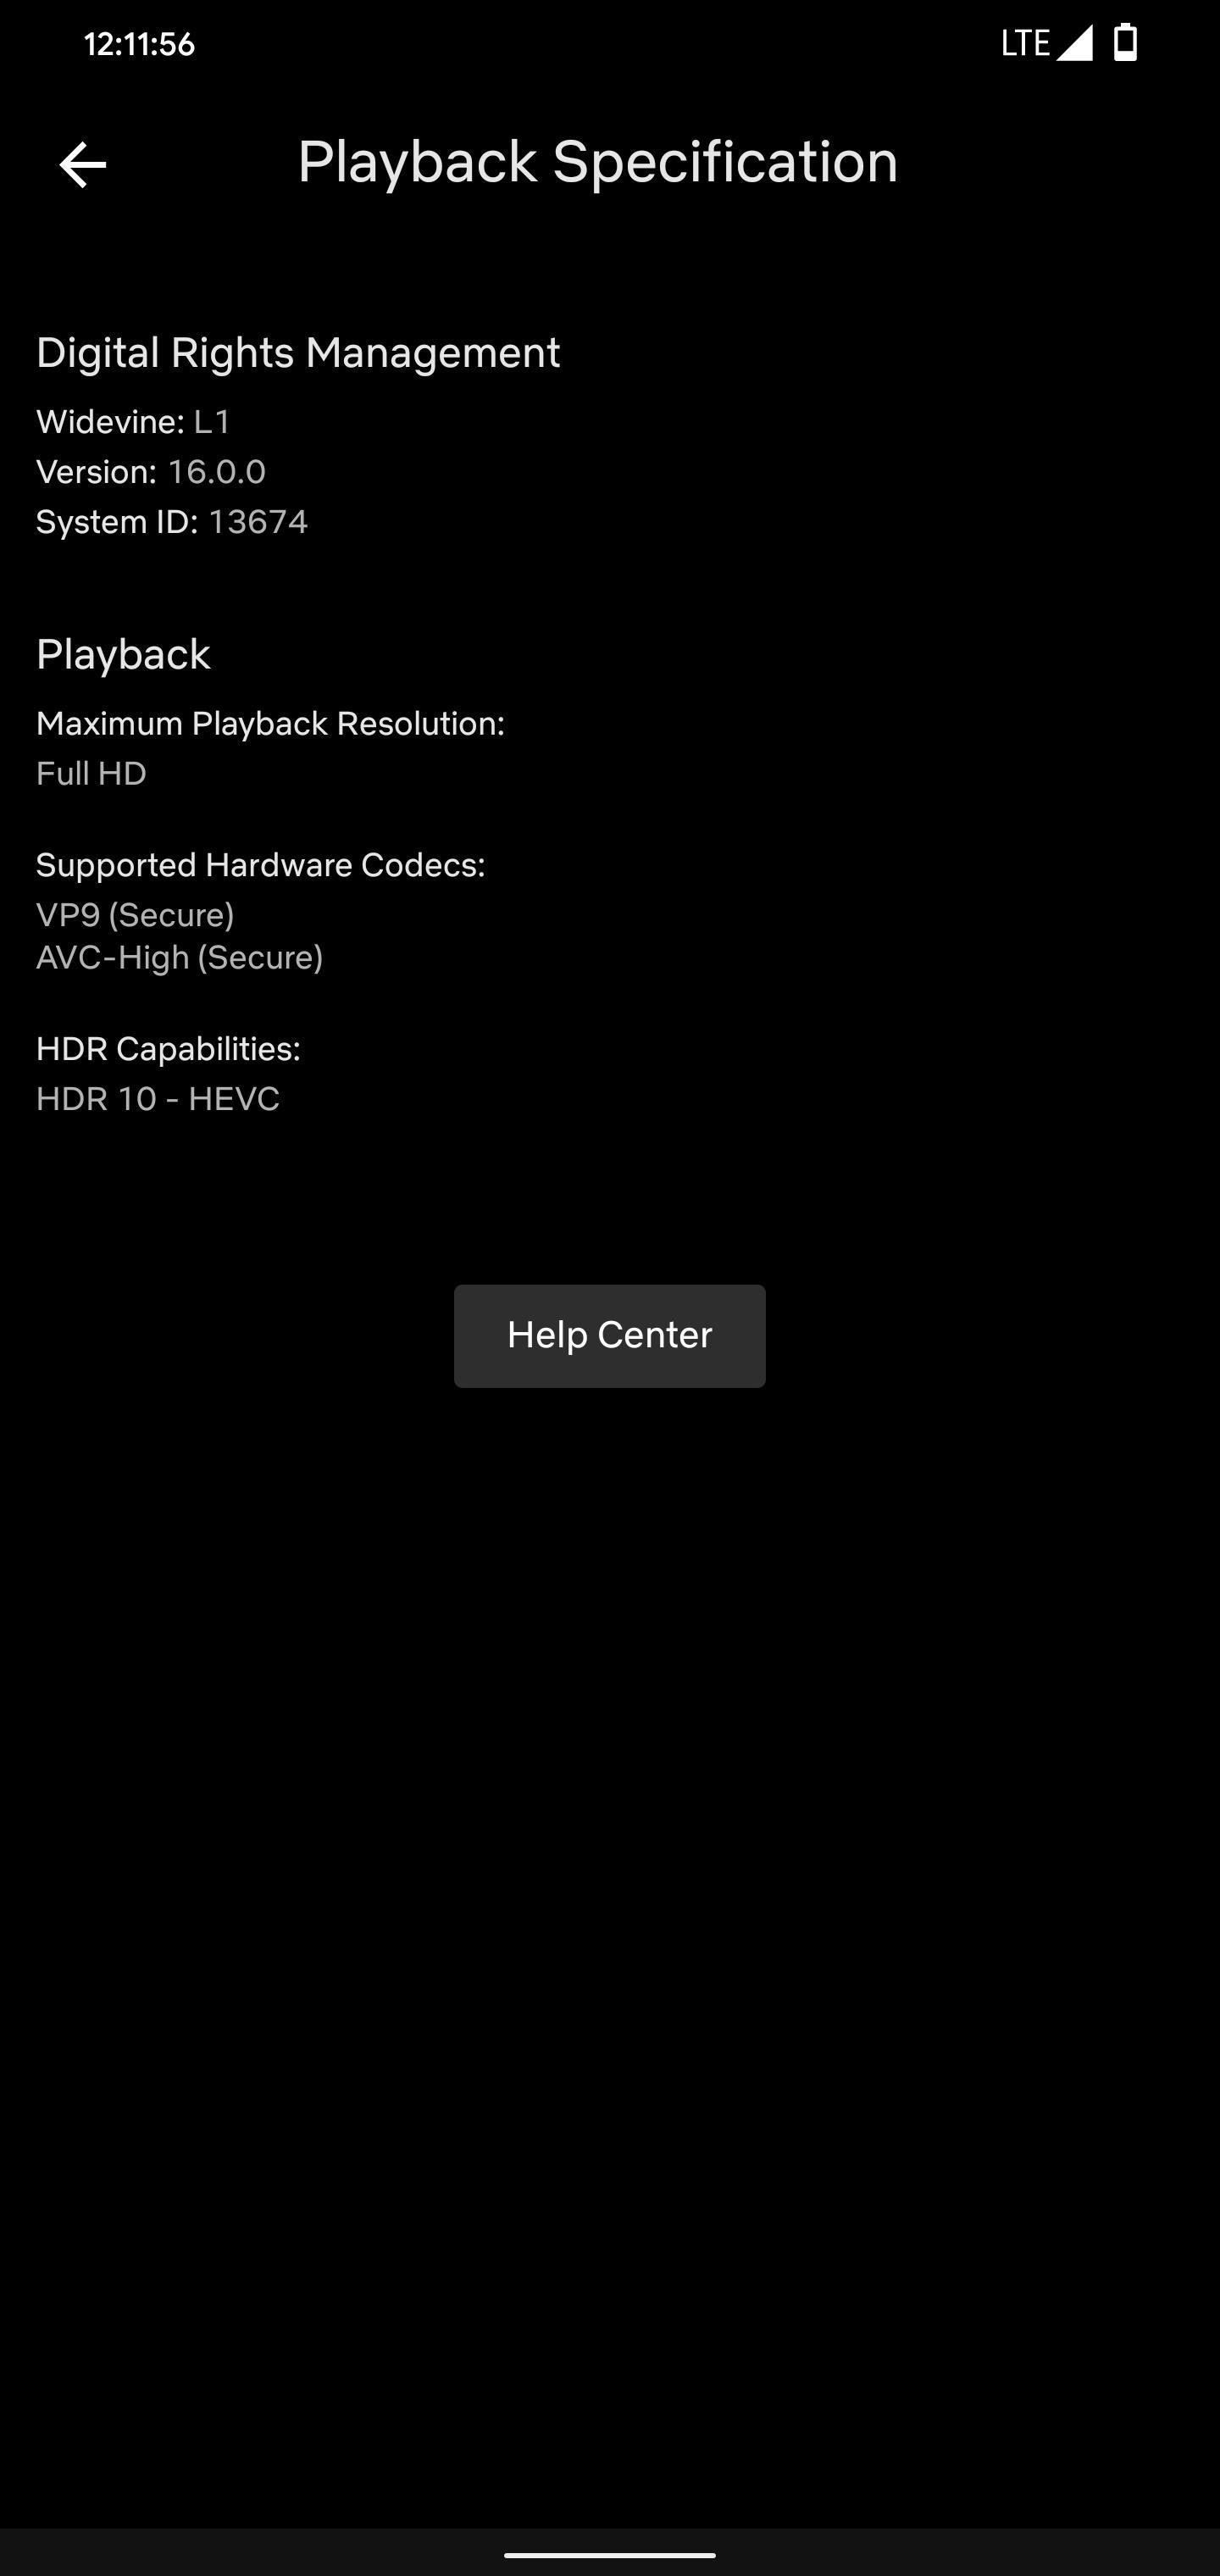 Netflix Caps Video Quality Based on Your Phone's Widevine DRM Level — Here's How to Check for HDR & FHD Support